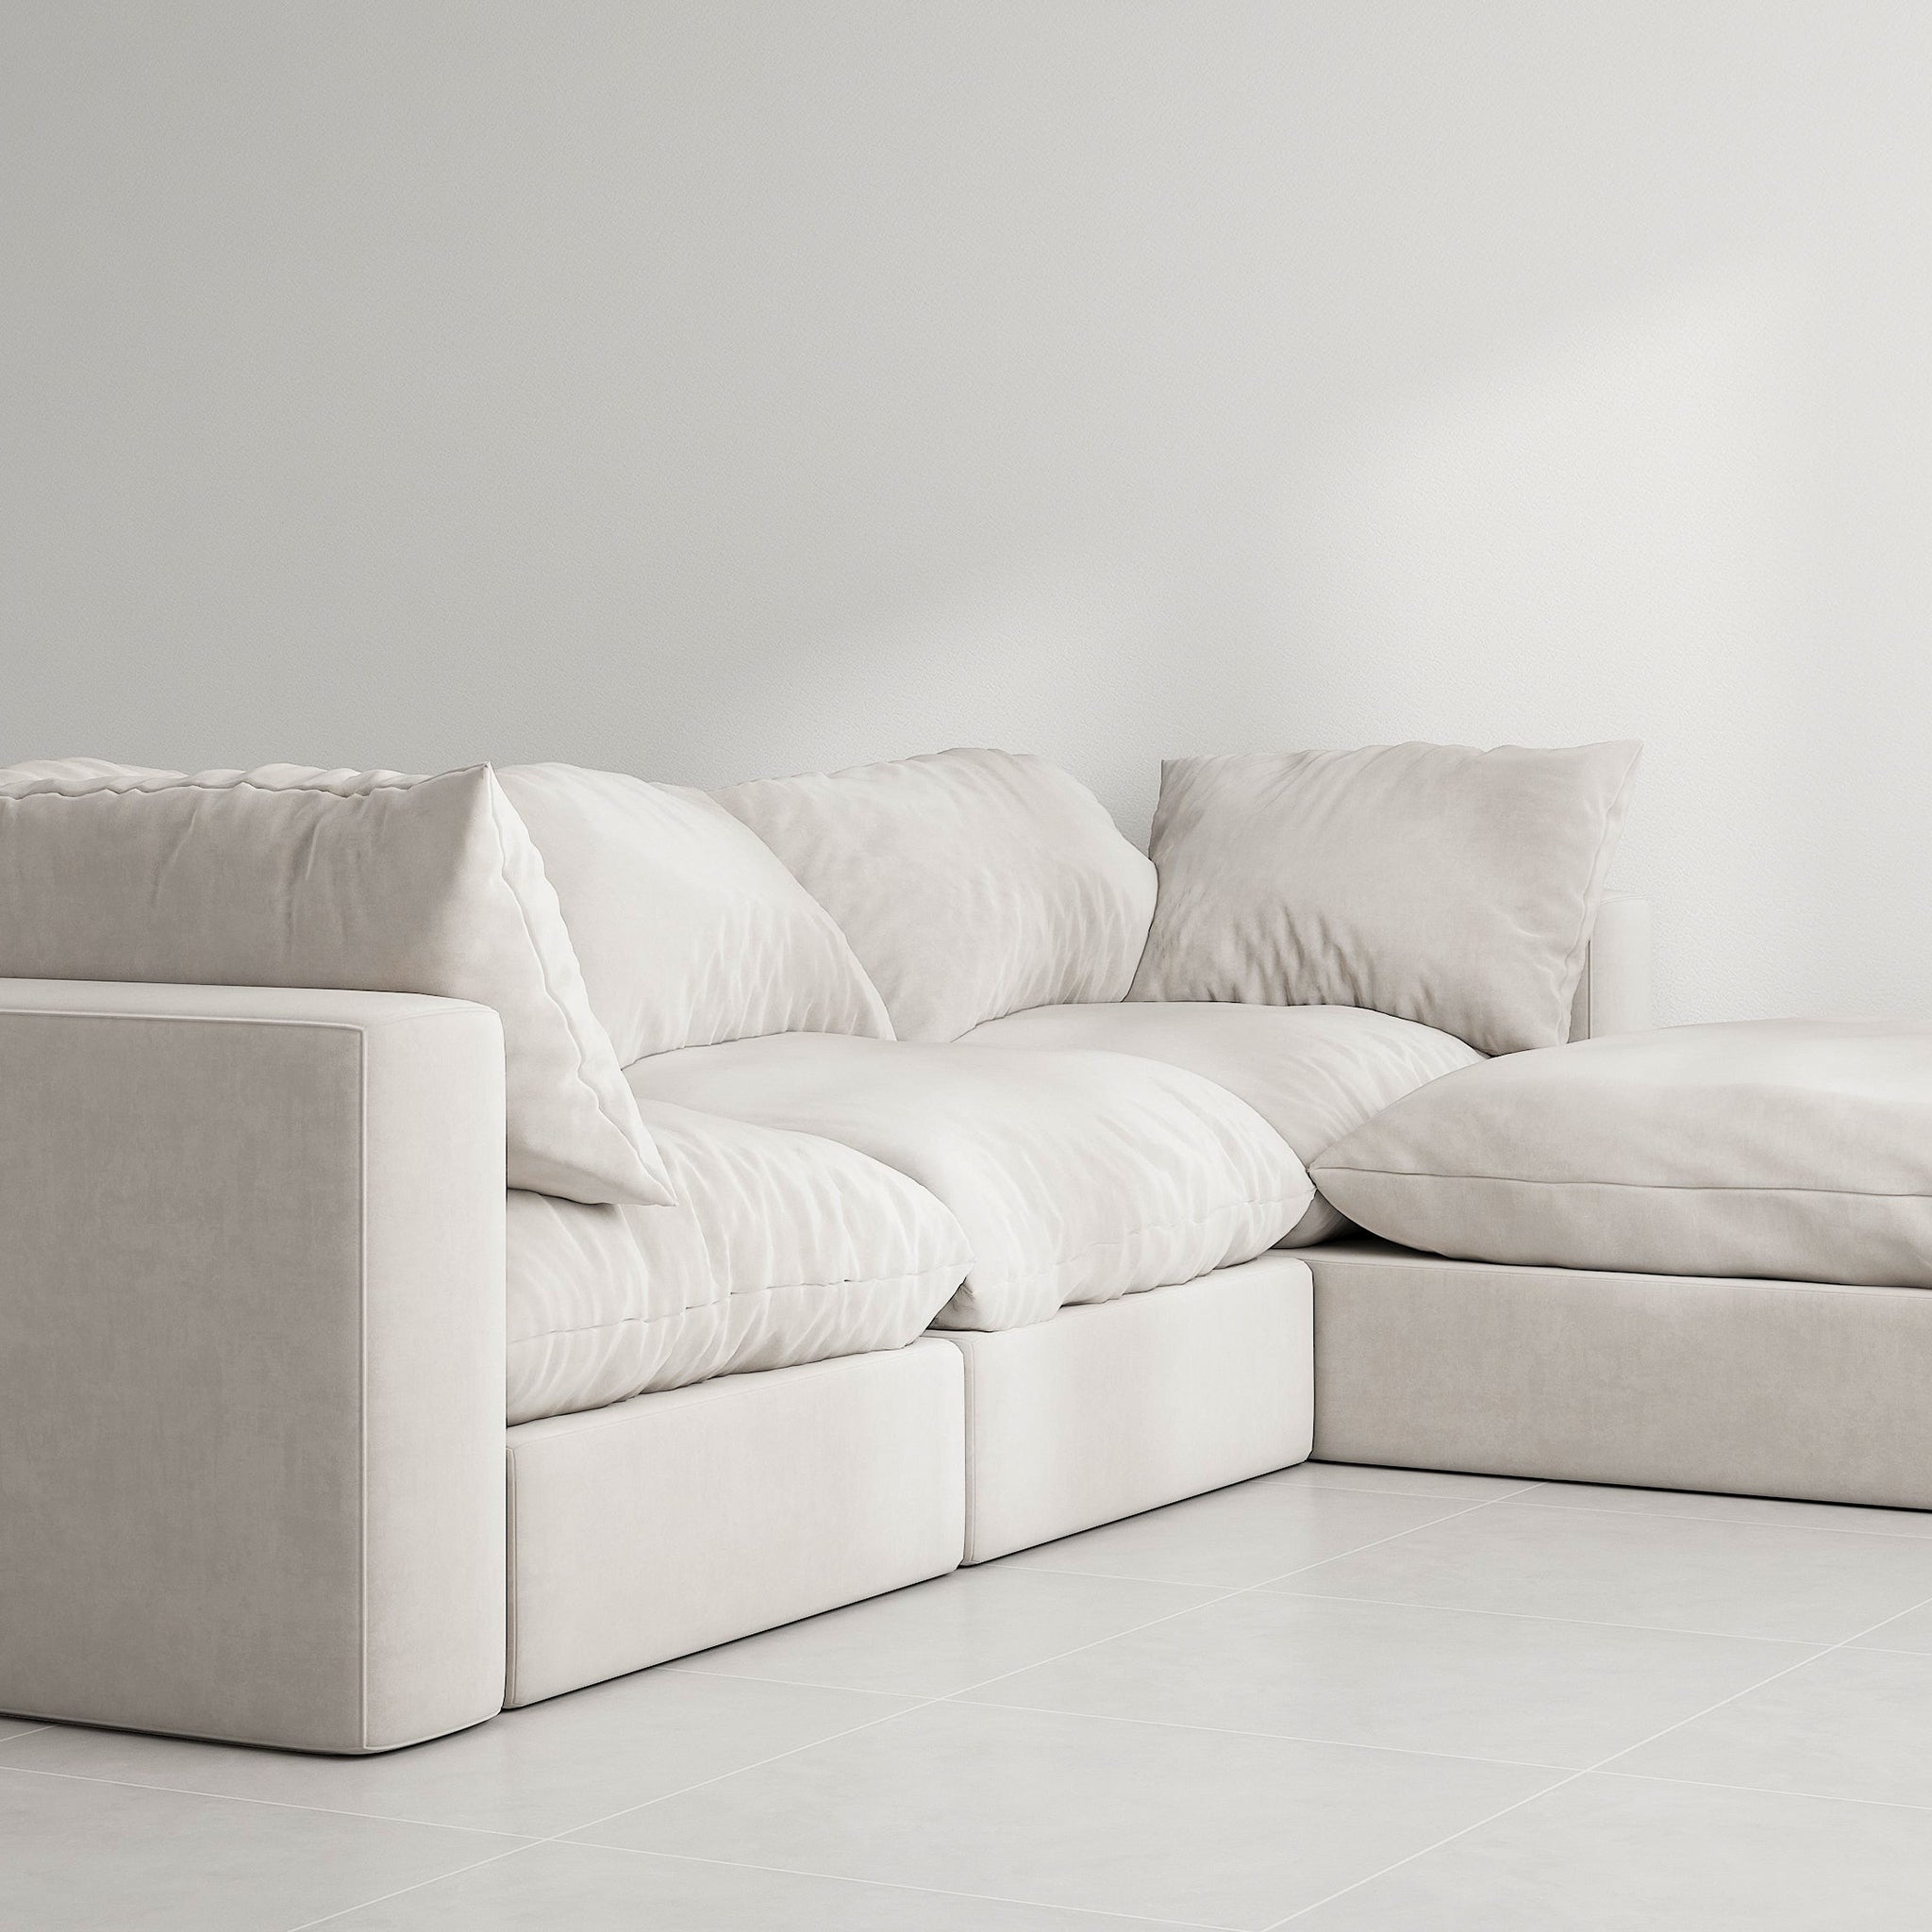 White sectional couch with detachable ottoman in a modern living room. The couch has a solid wood frame and is upholstered in white fabric with removable covers. This luxurious couch is perfect for relaxing in style.